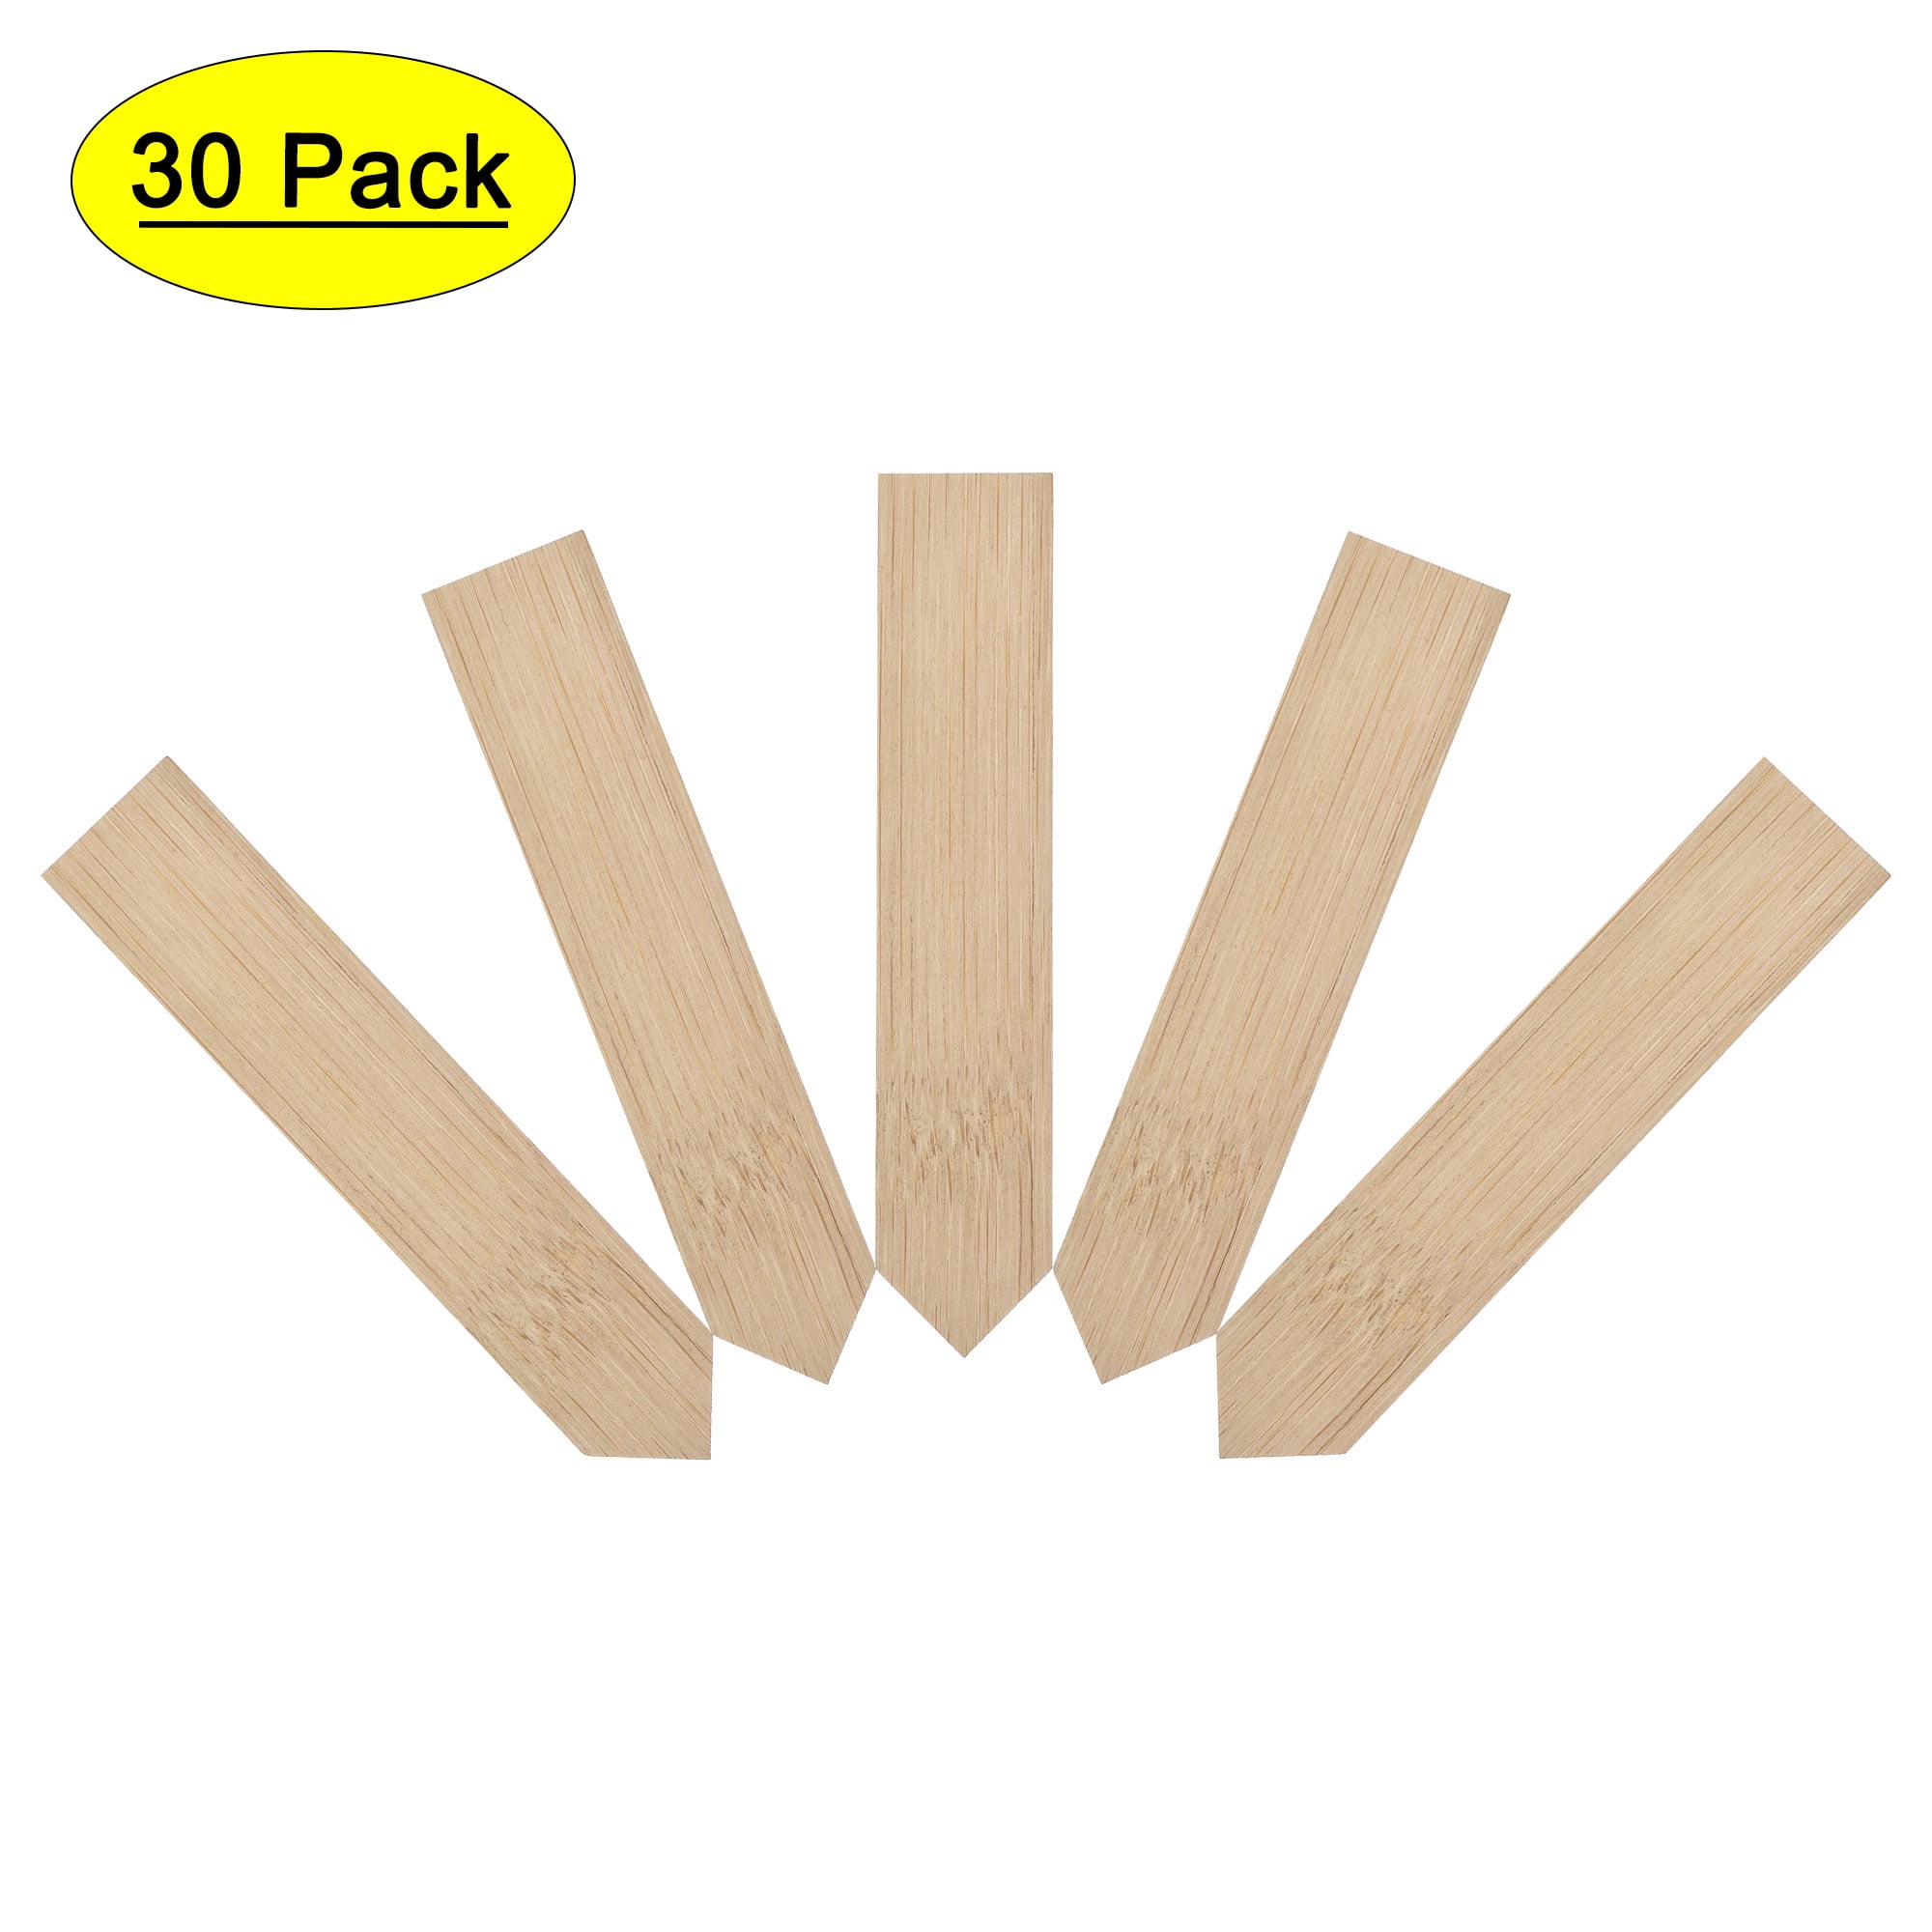 Wooden Stakes Wooden Pegs Free Carriage Site Marker Posts Wood Marker Posts 